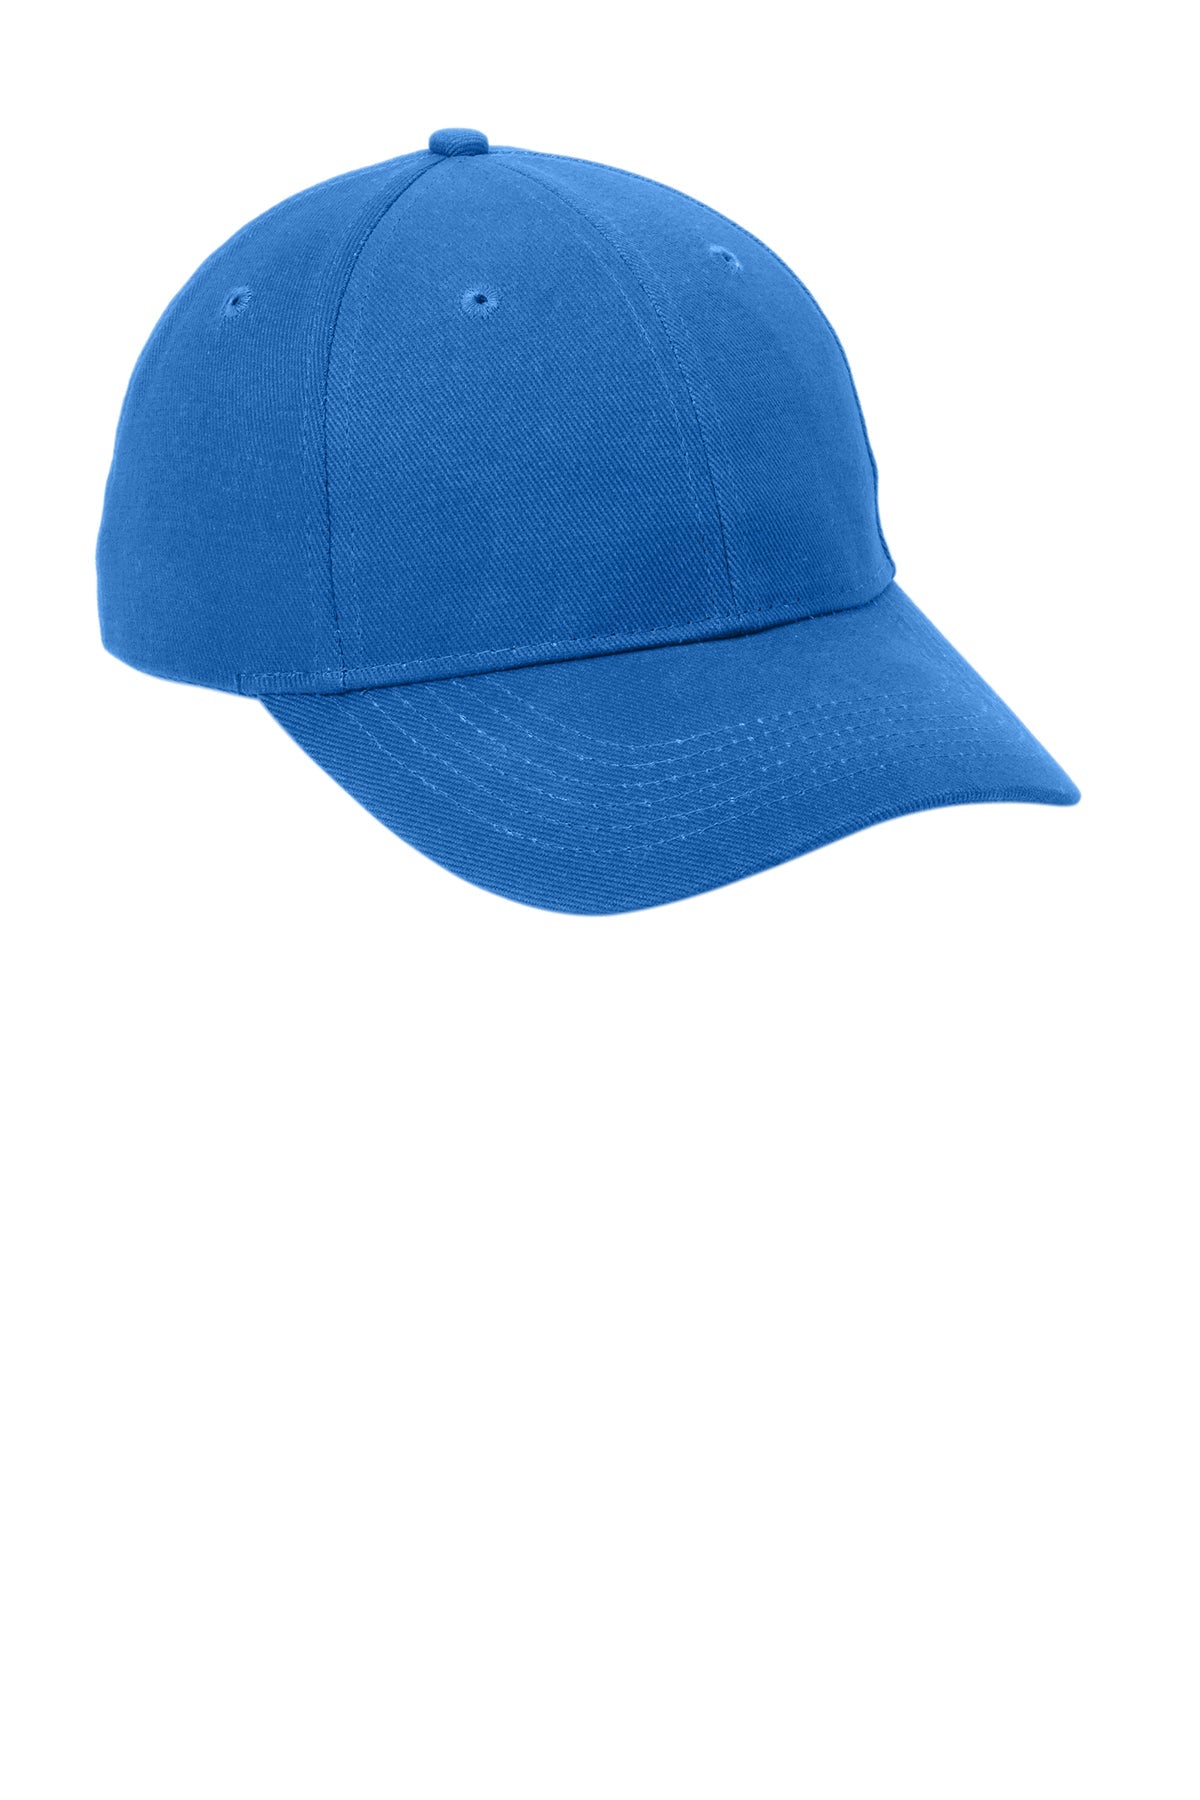 Port & Company Brushed Twill Branded Caps, Royal